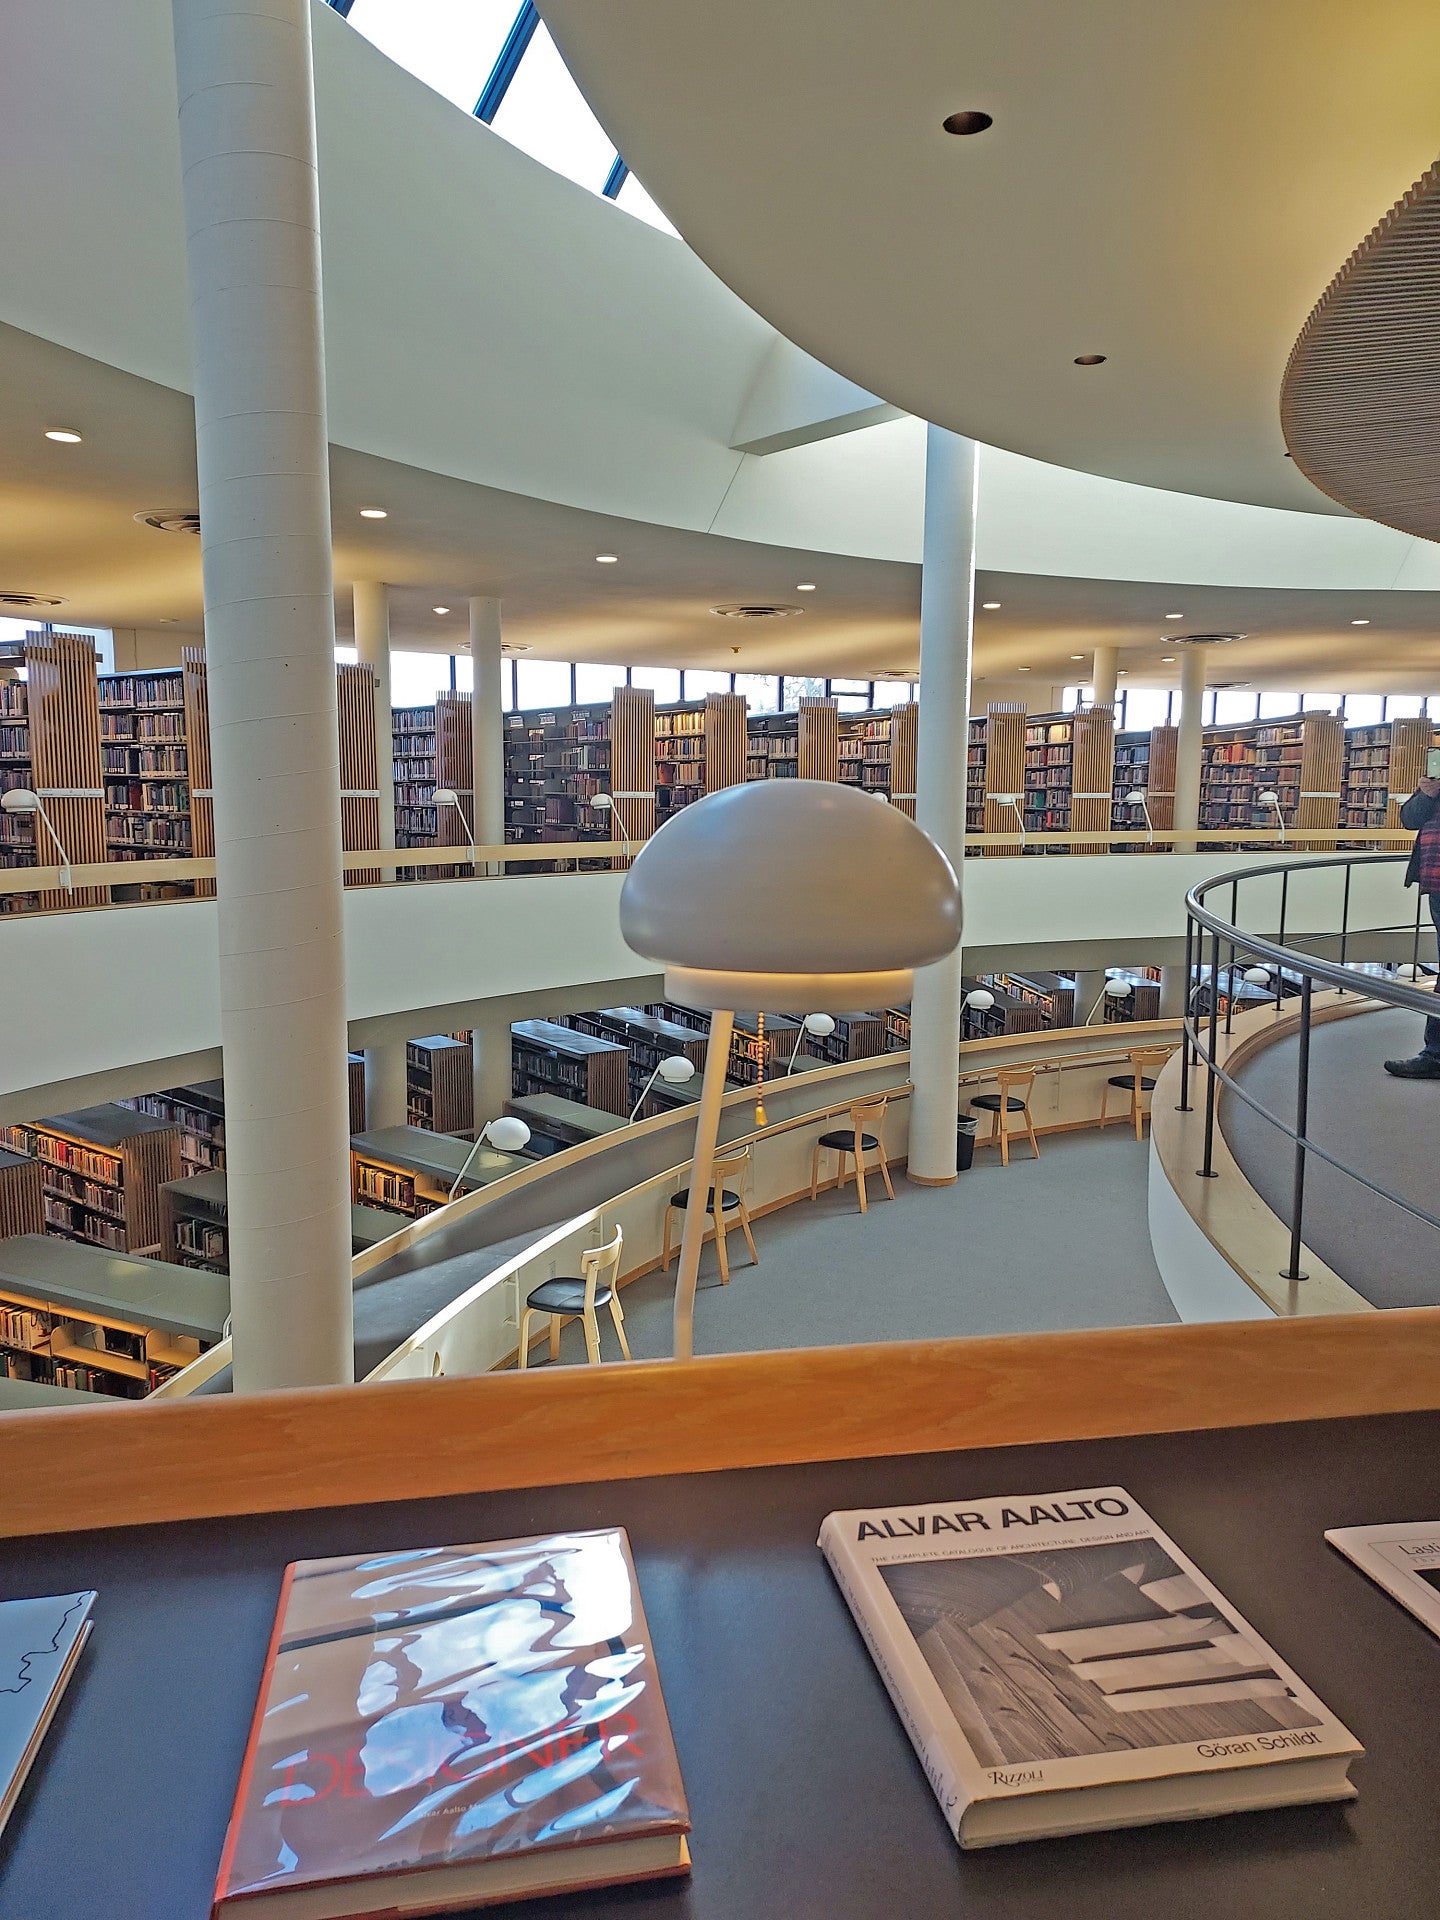 A view of the library at the Mount Angel Library.